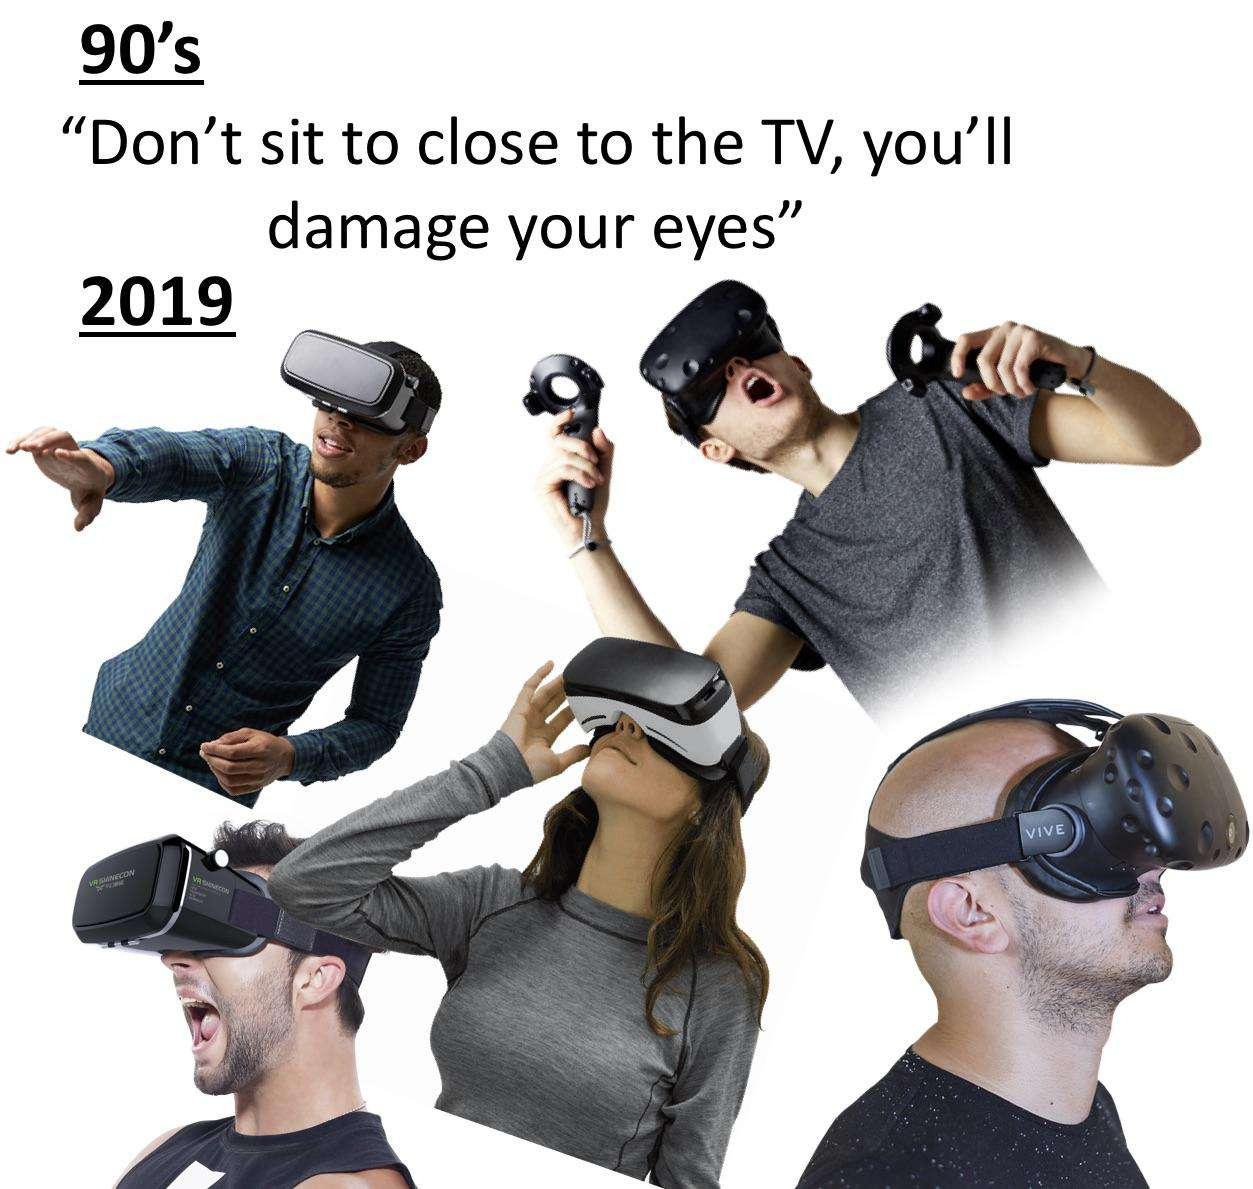 90’s: “Don’t sit to (sic) close to the TV, you’ll damage your eyes”

2019: pictures of people wearing VR goggles in various poses.